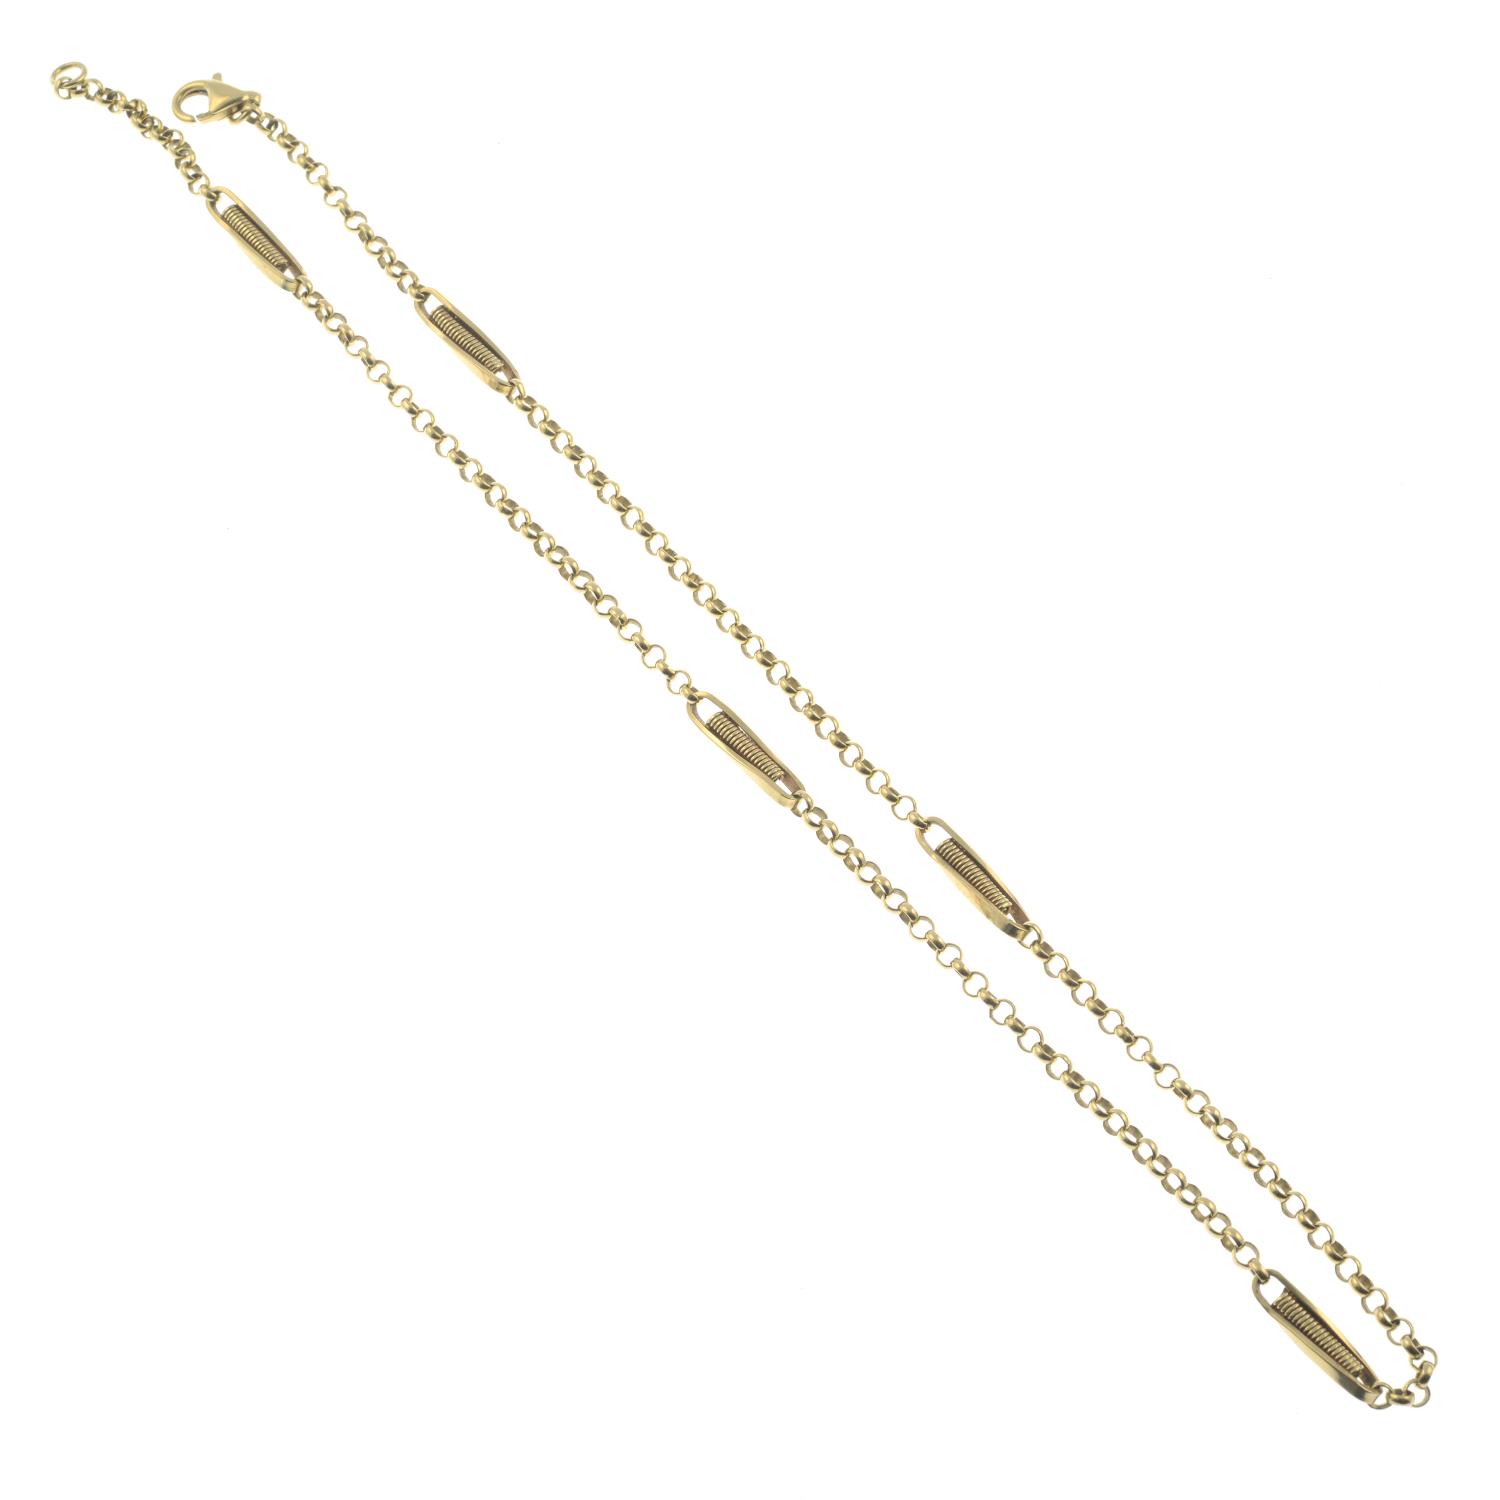 A 9ct gold fancy-link chain.Hallmarks for 9ct gold. - Image 2 of 2